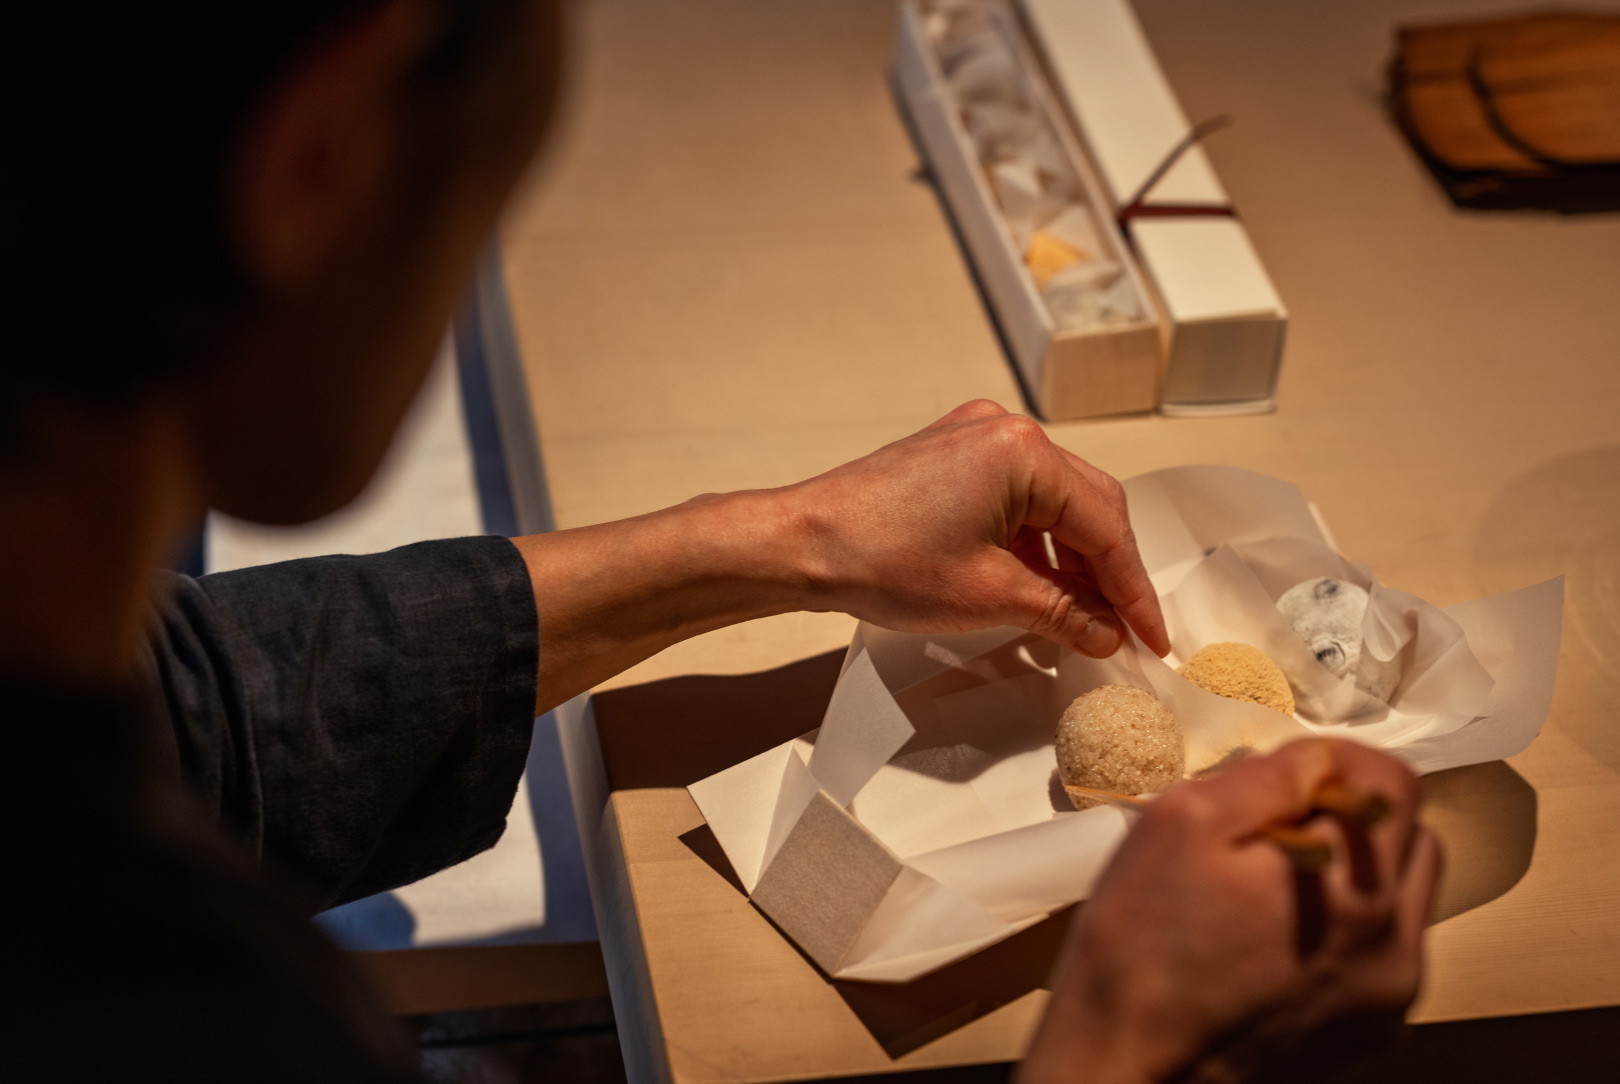 a shop assistant wrap a box of wagashi, traditional Japanese pastries, in white paper